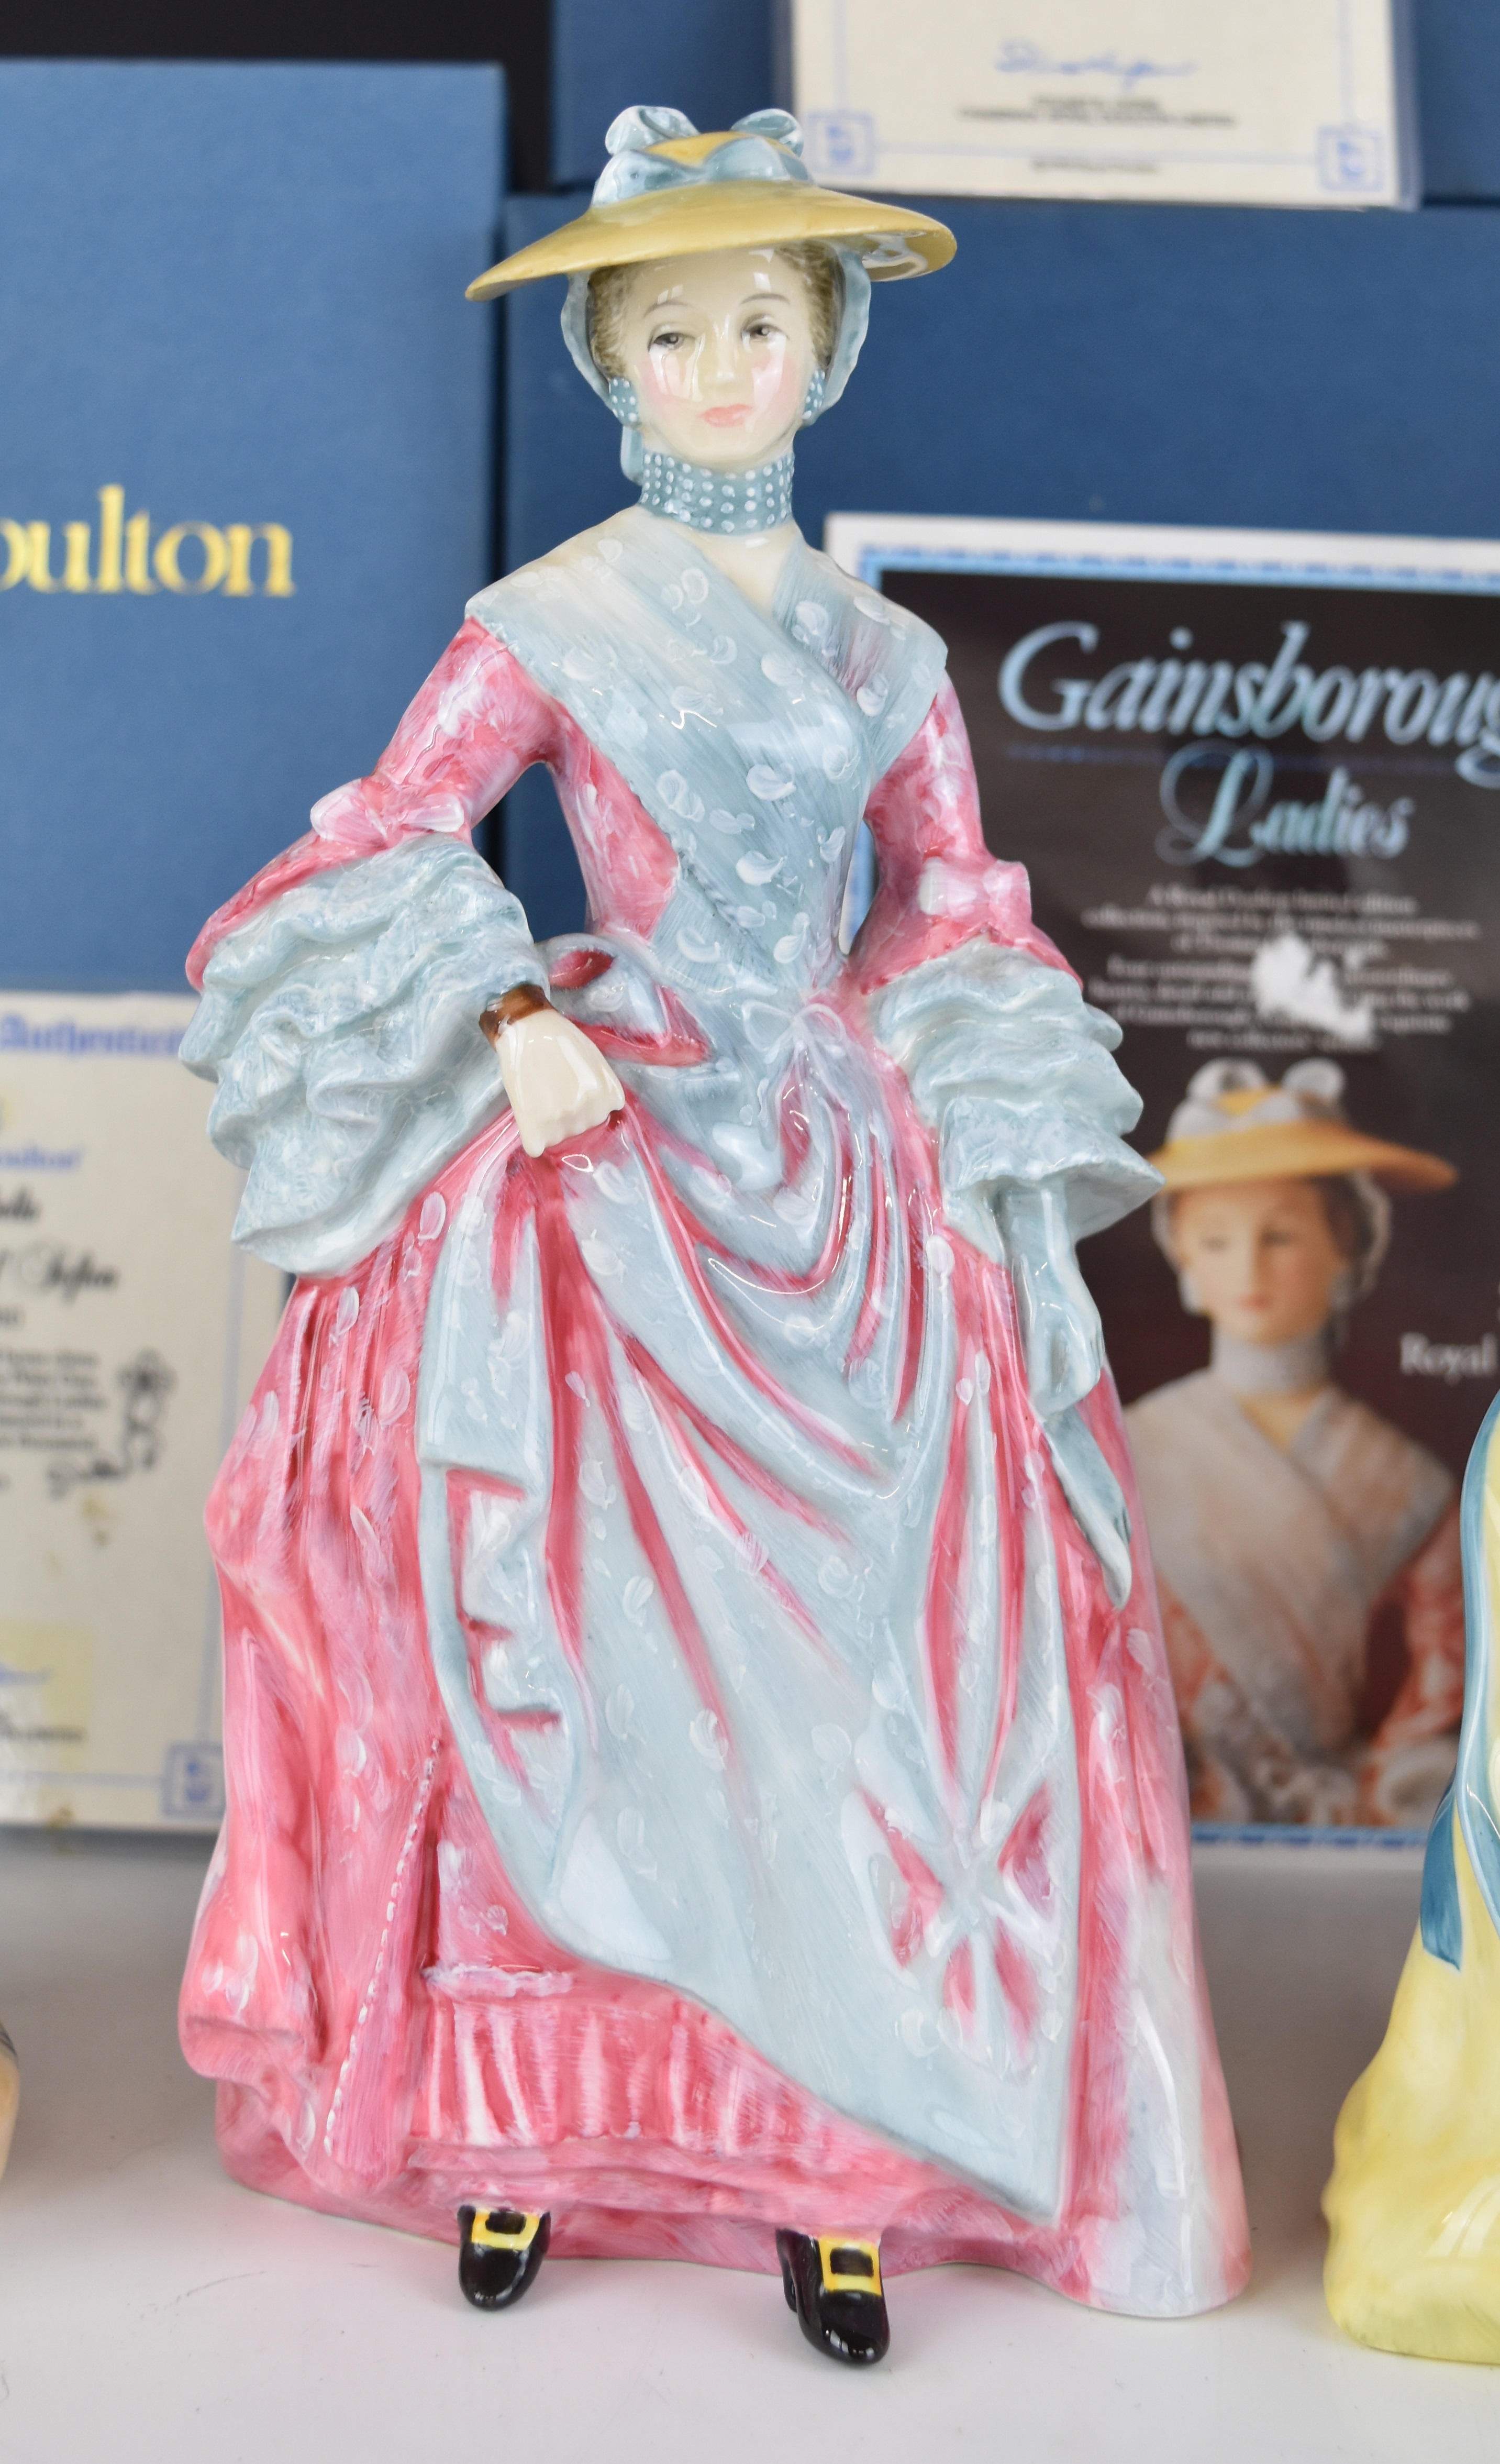 Four Royal Doulton limited edition figures from the Gainsborough Ladies series comprising Sophia - Image 11 of 14